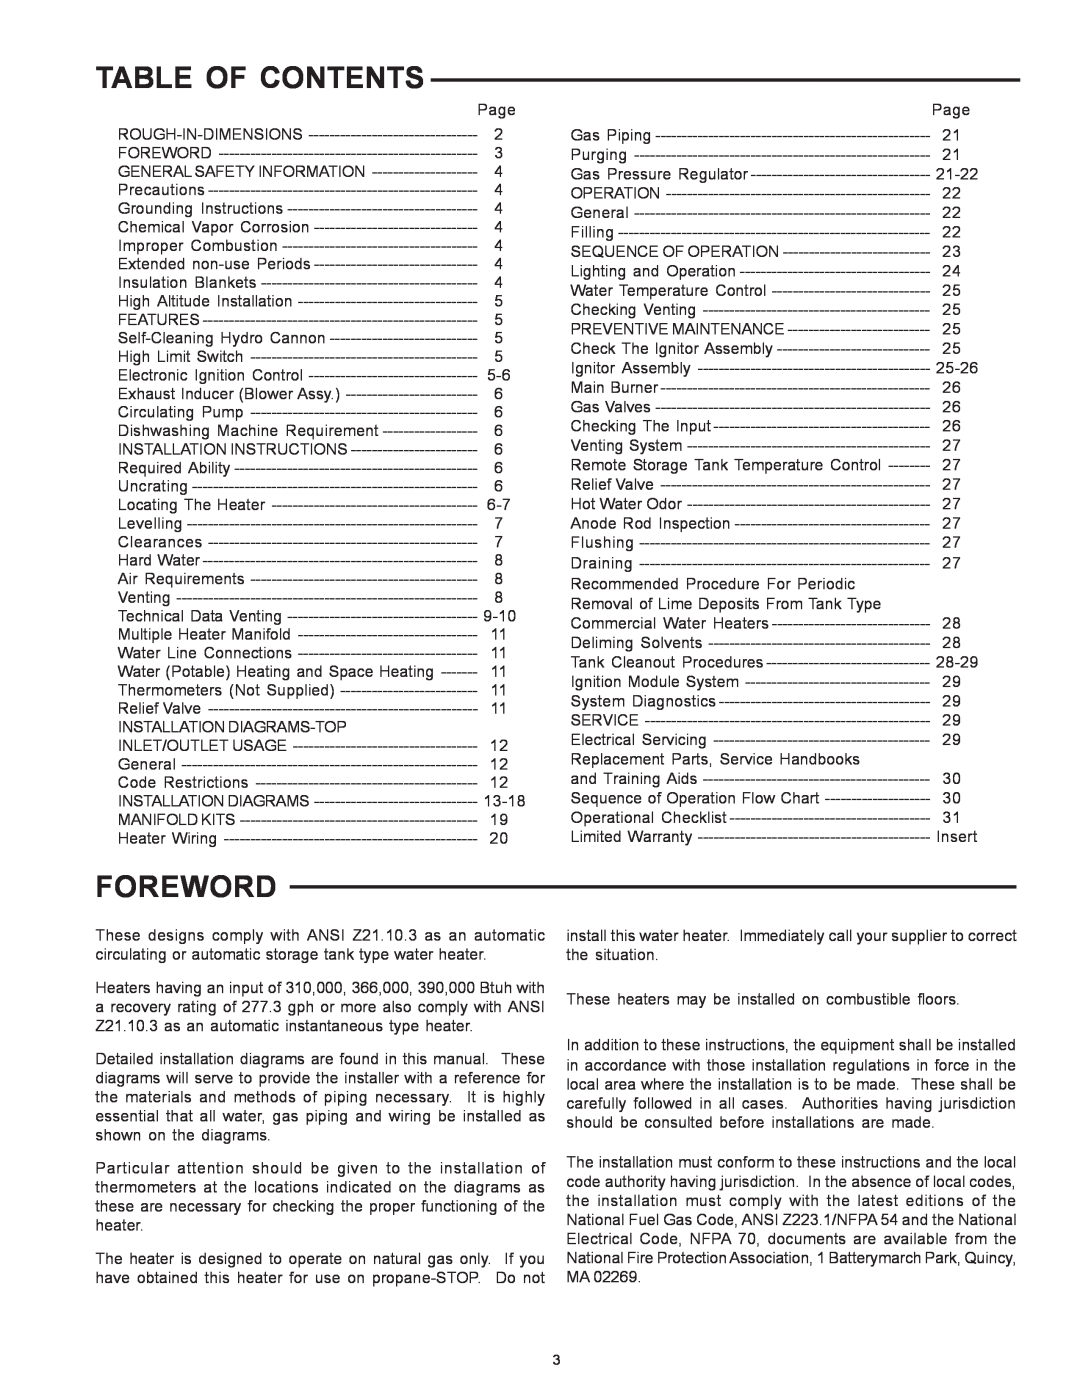 State Industries SBN85390NE/A warranty Table Of Contents, Foreword 